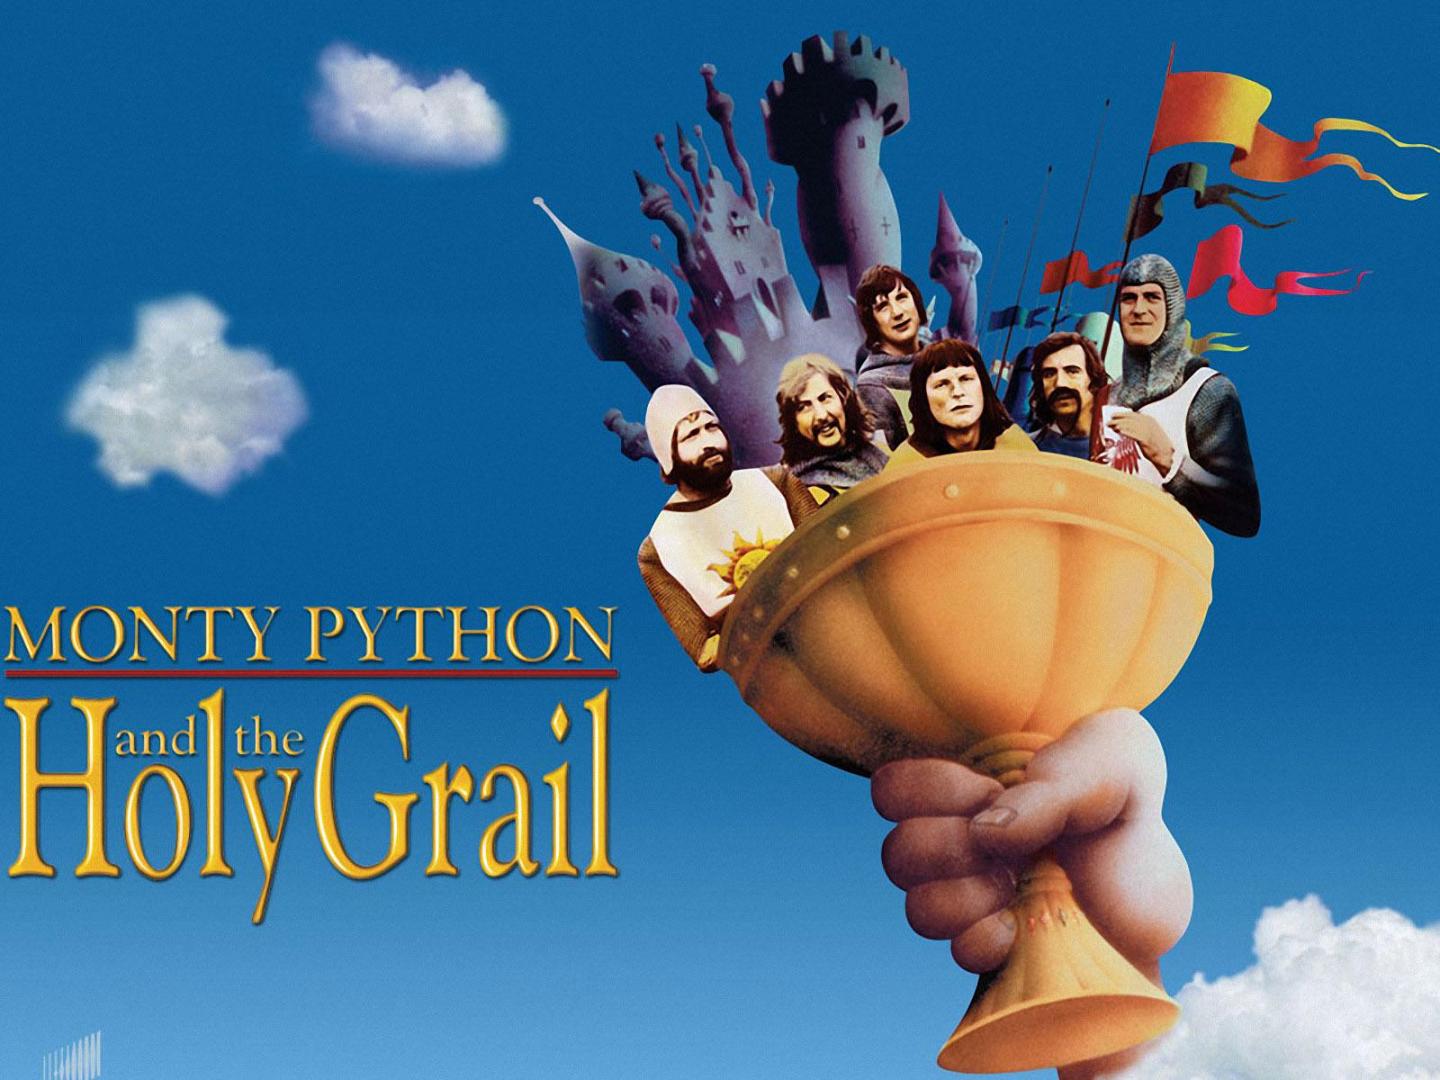 monty_python_and_the_holy_grail_59205-1600x1200